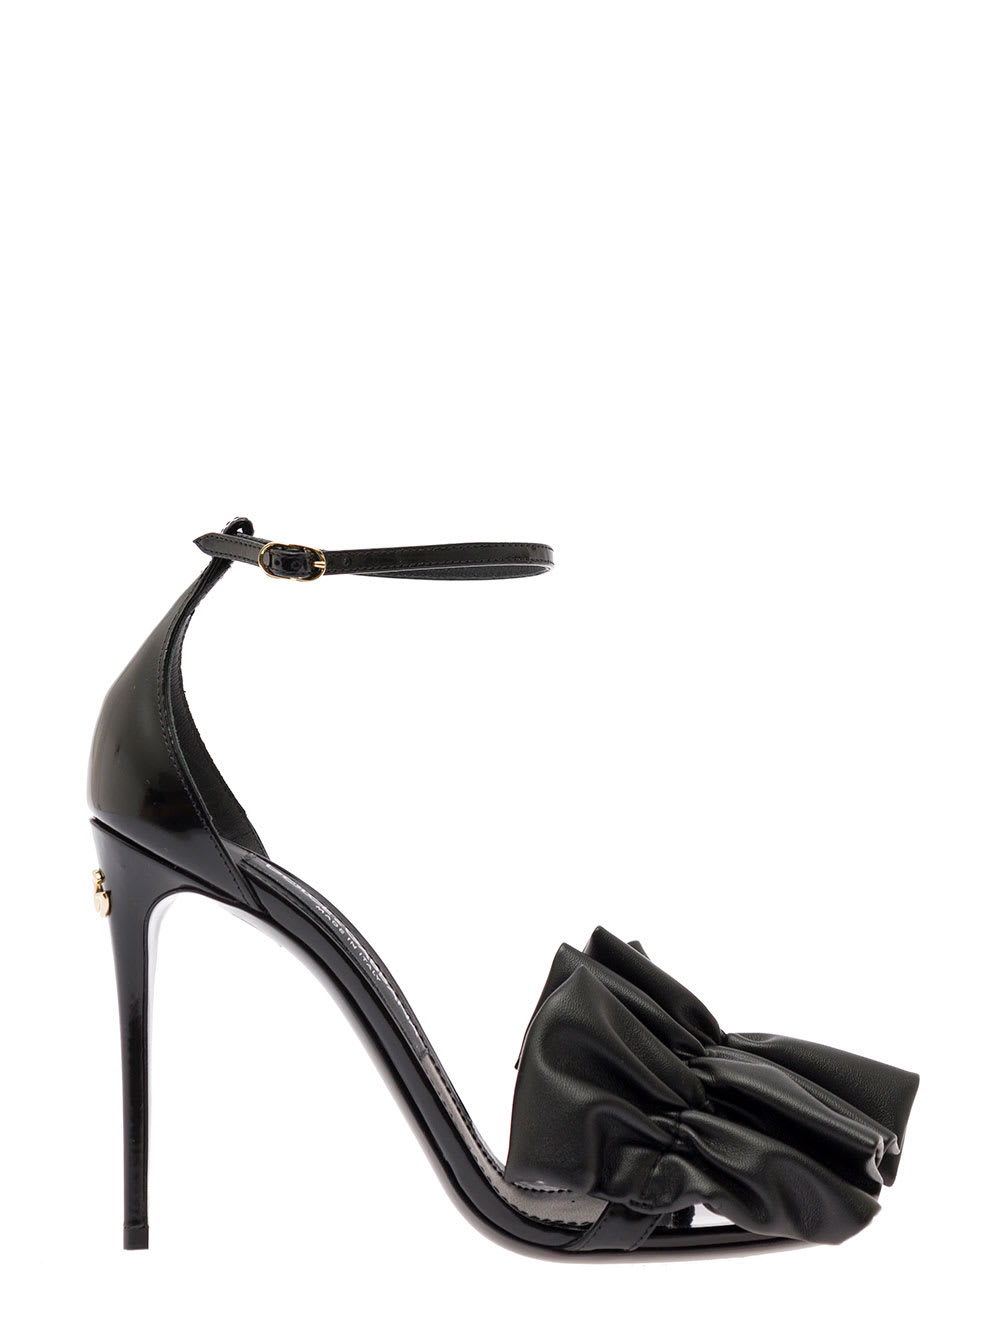 Dolce & Gabbana keira Black Sandals With Ruching In Leather Woman Dolce & Gabbana